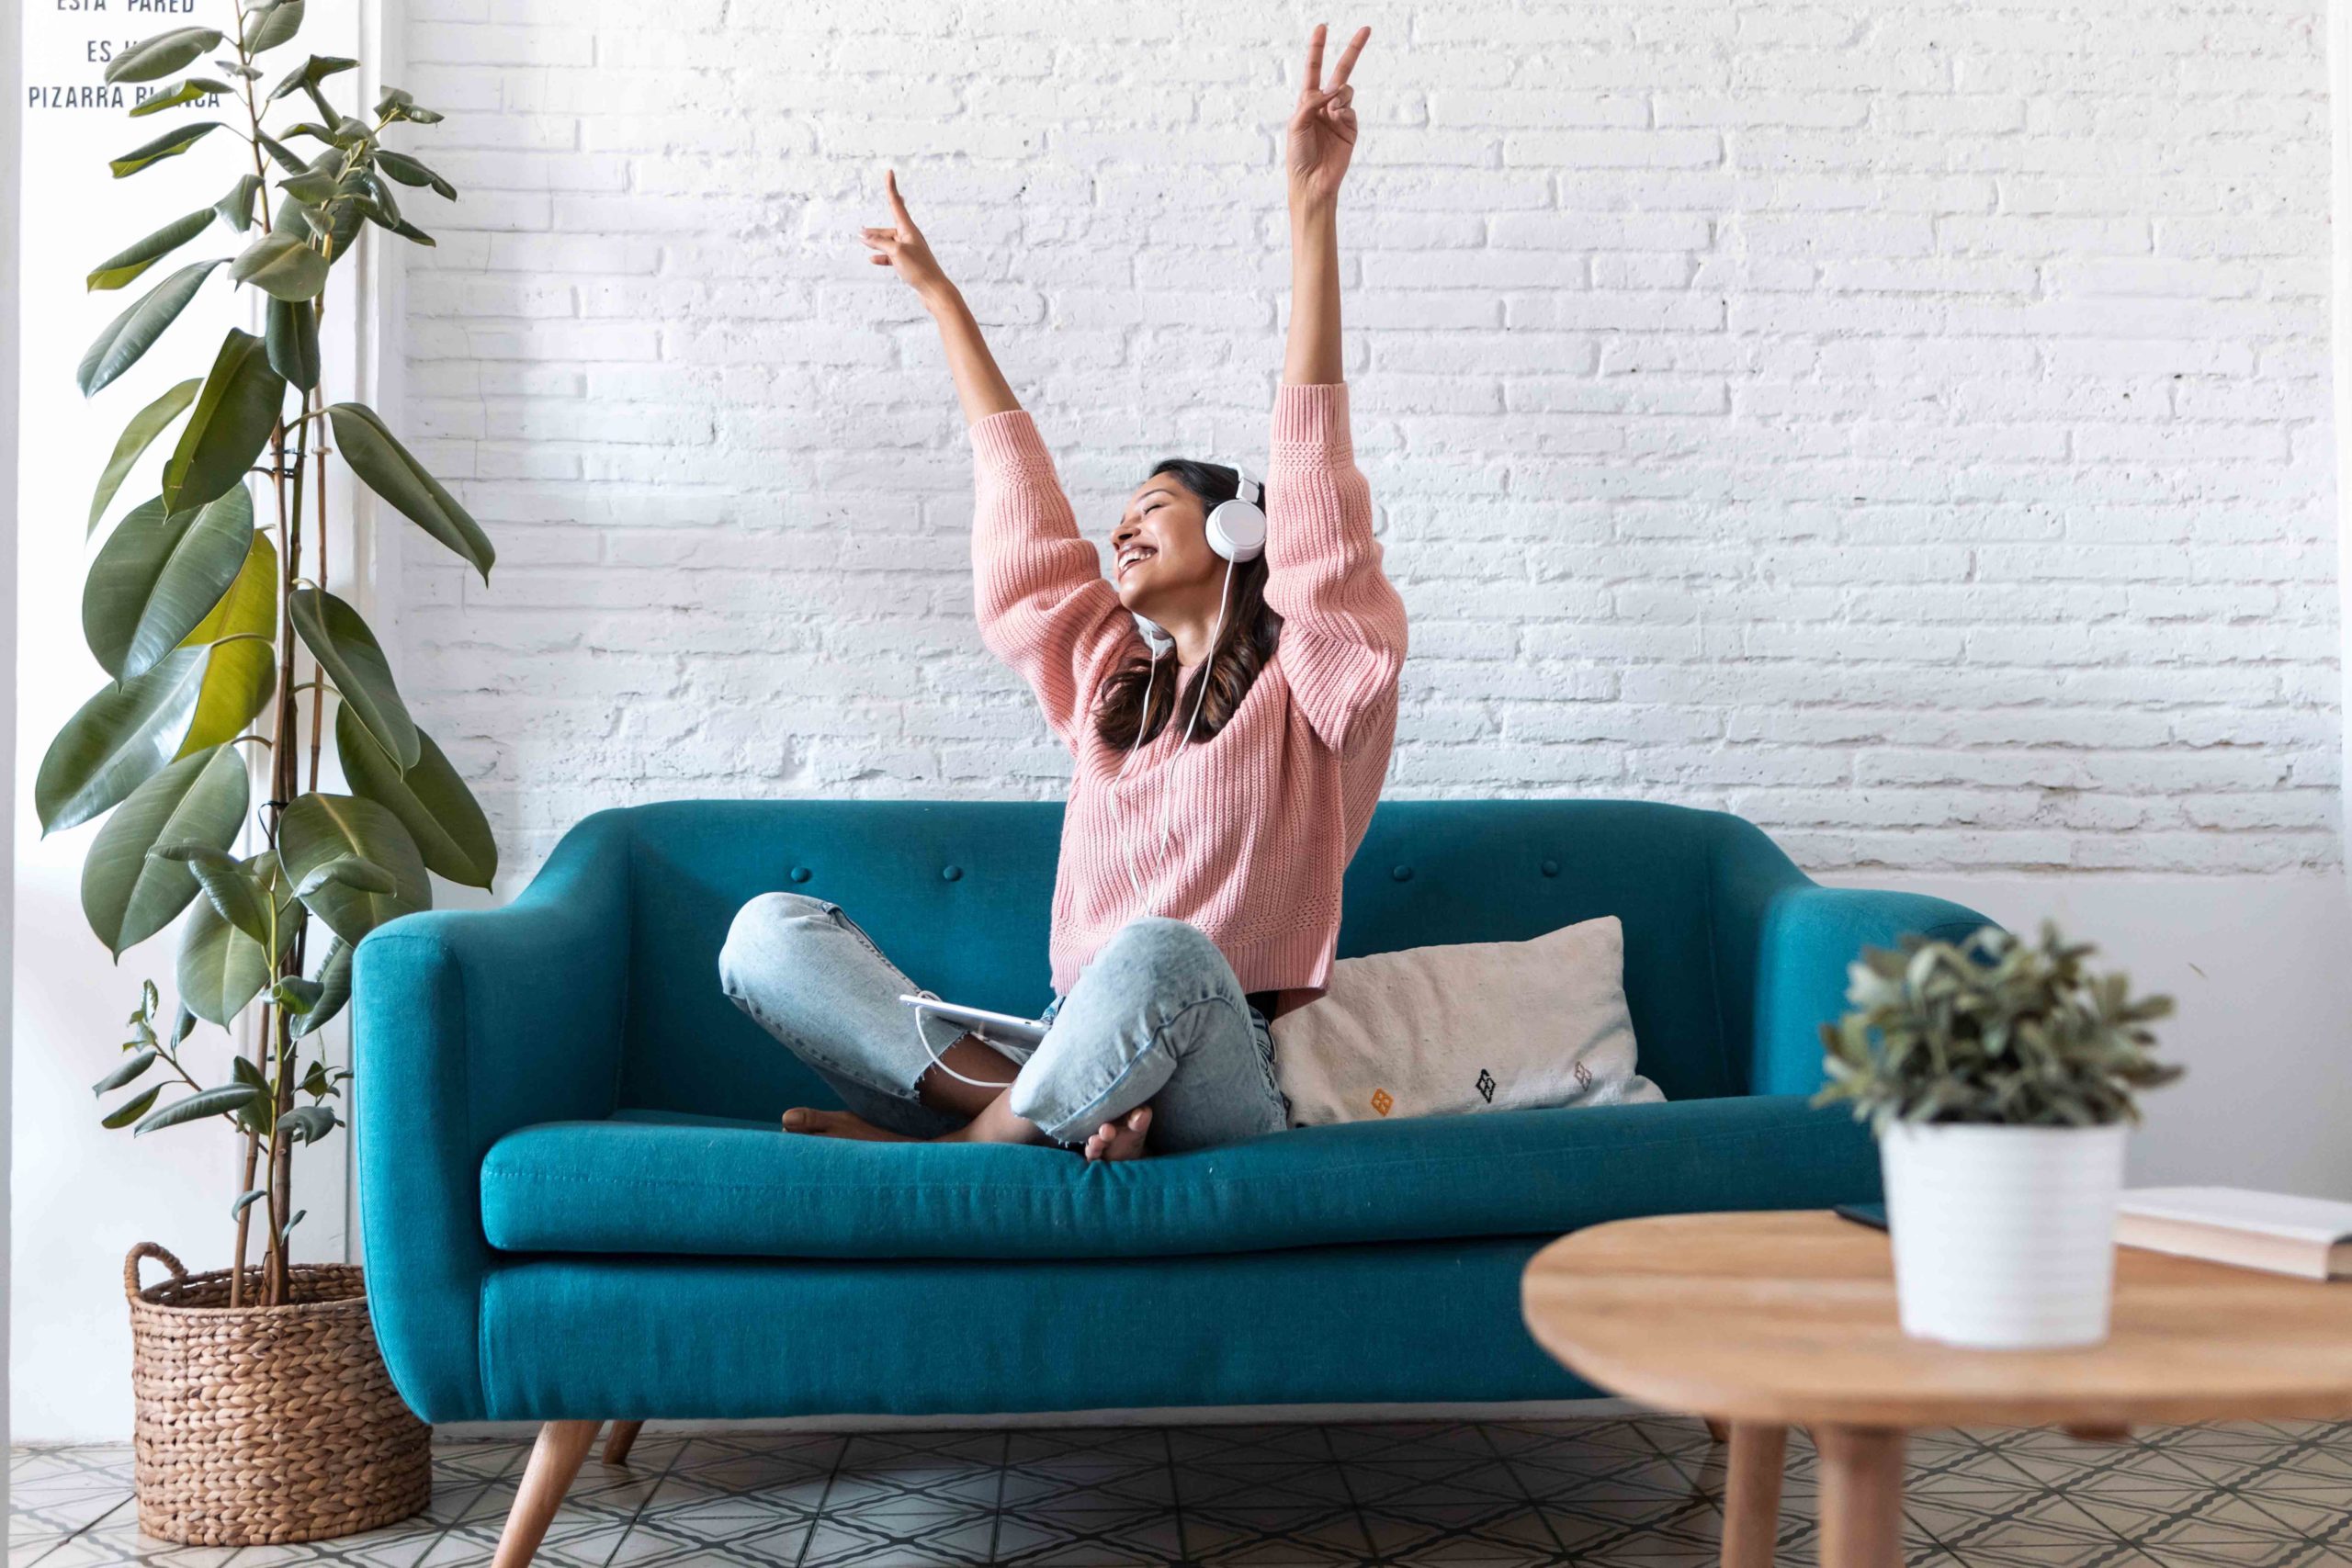 A joyful woman wearing headphones is sitting on a teal sofa with her hands raised in the air, seemingly enjoying her favorite music in a bright, cozy living room.